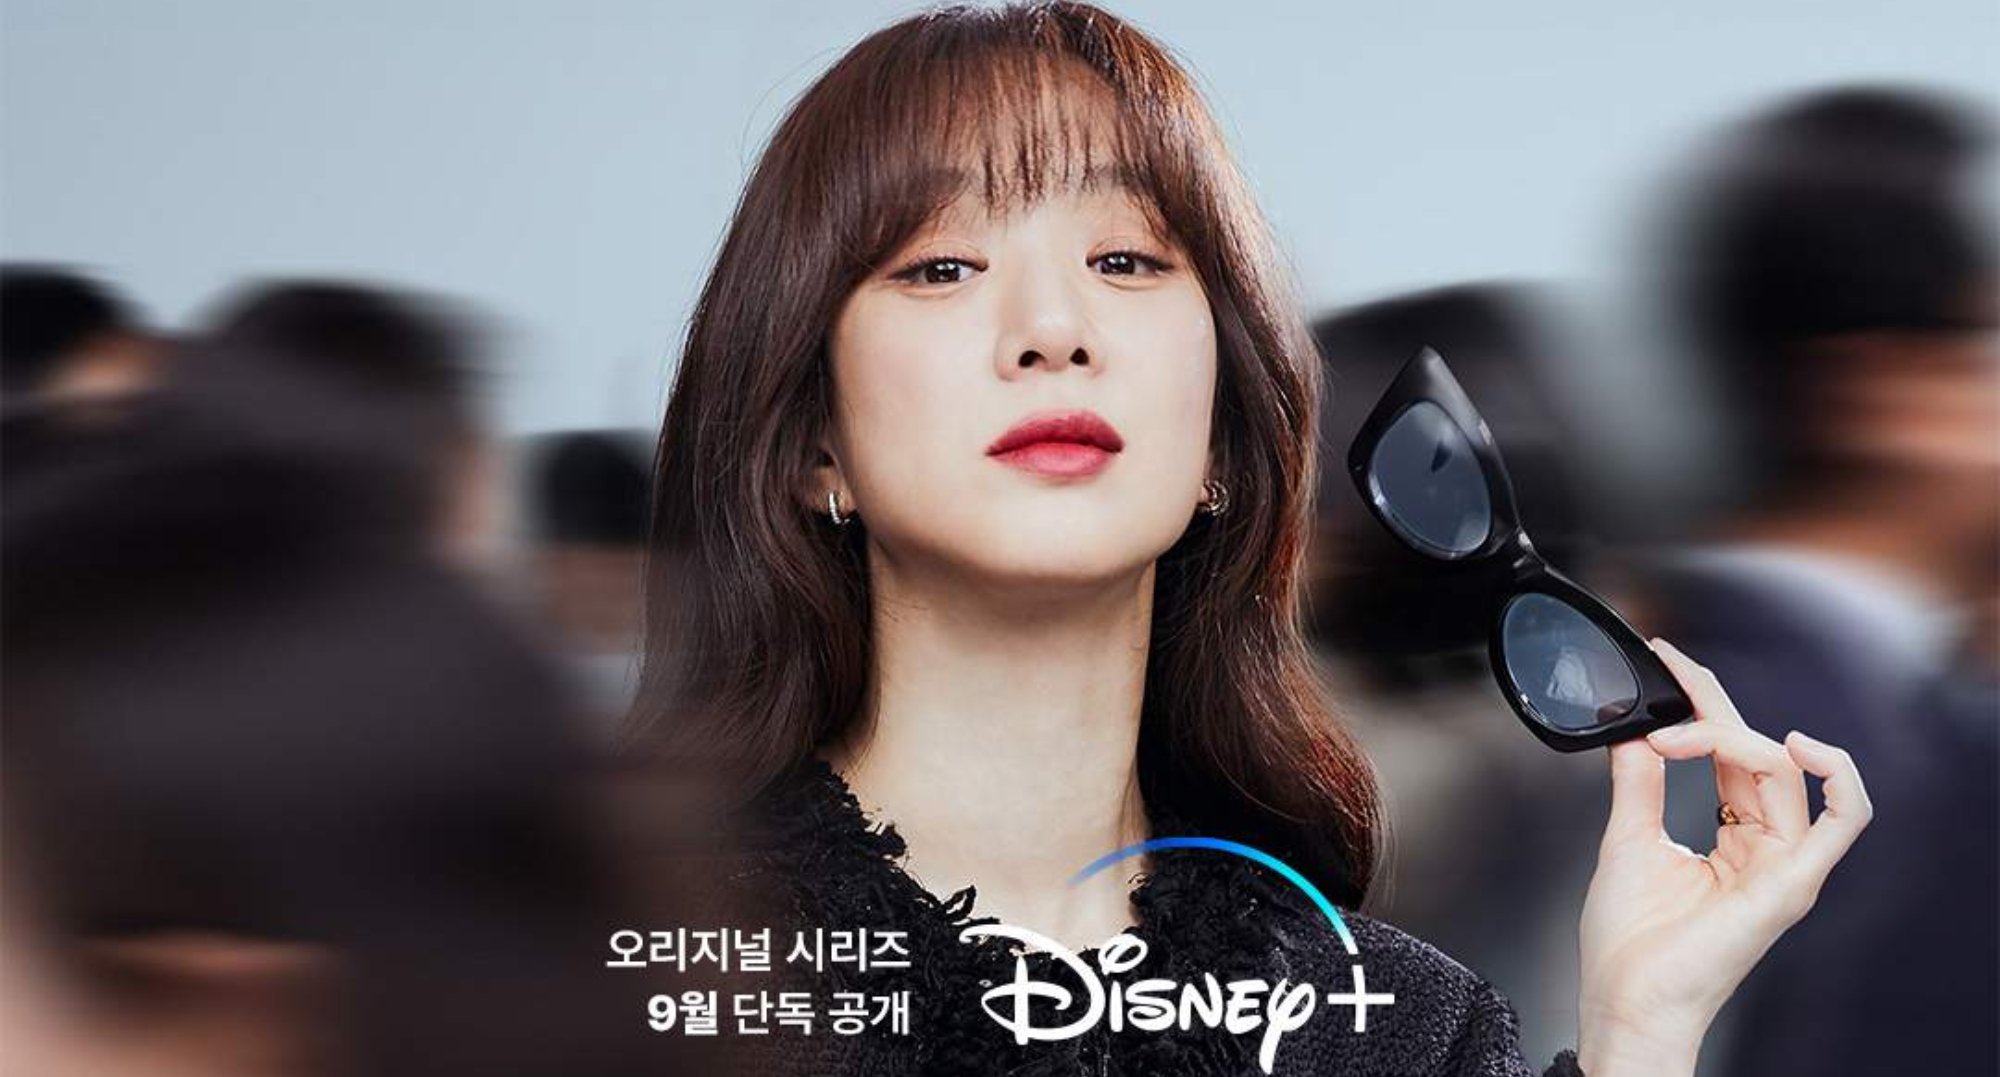 Actor Jung Ryeo-won in the Disney+ K-drama 'May it Please the Court.'